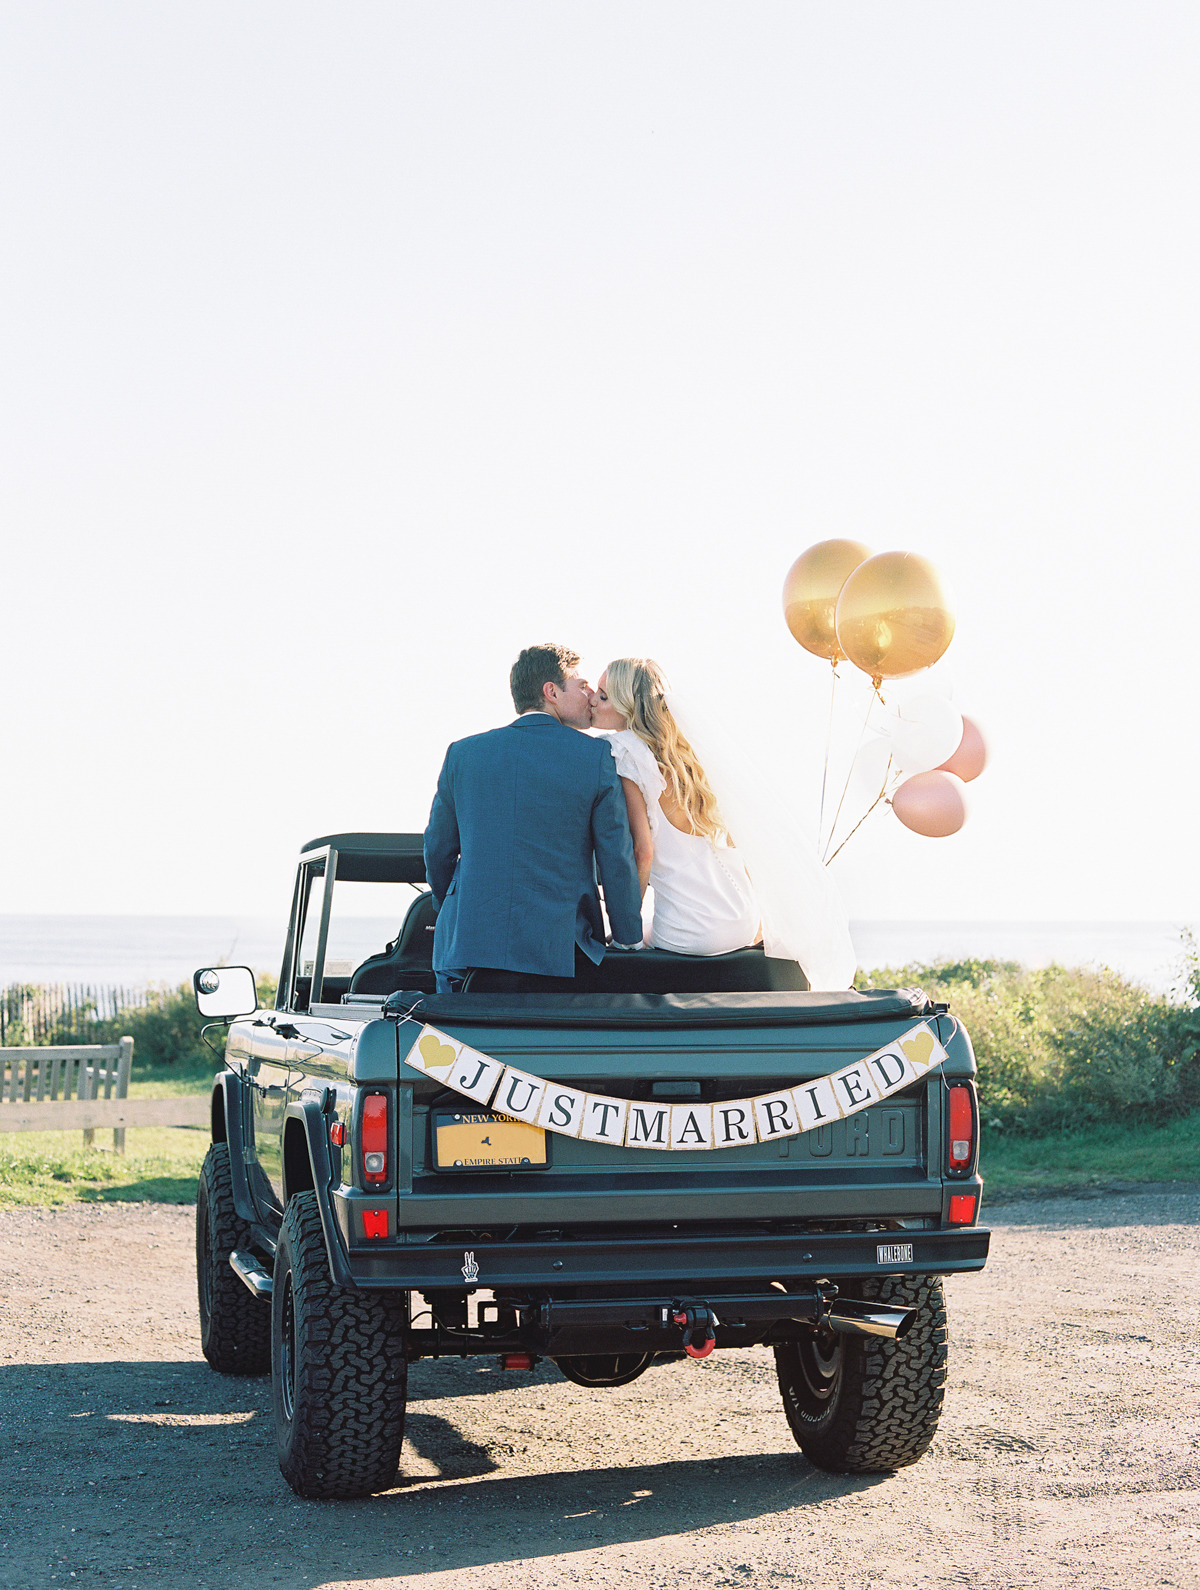 Bride and groom kissing on back of car with balloons and sign